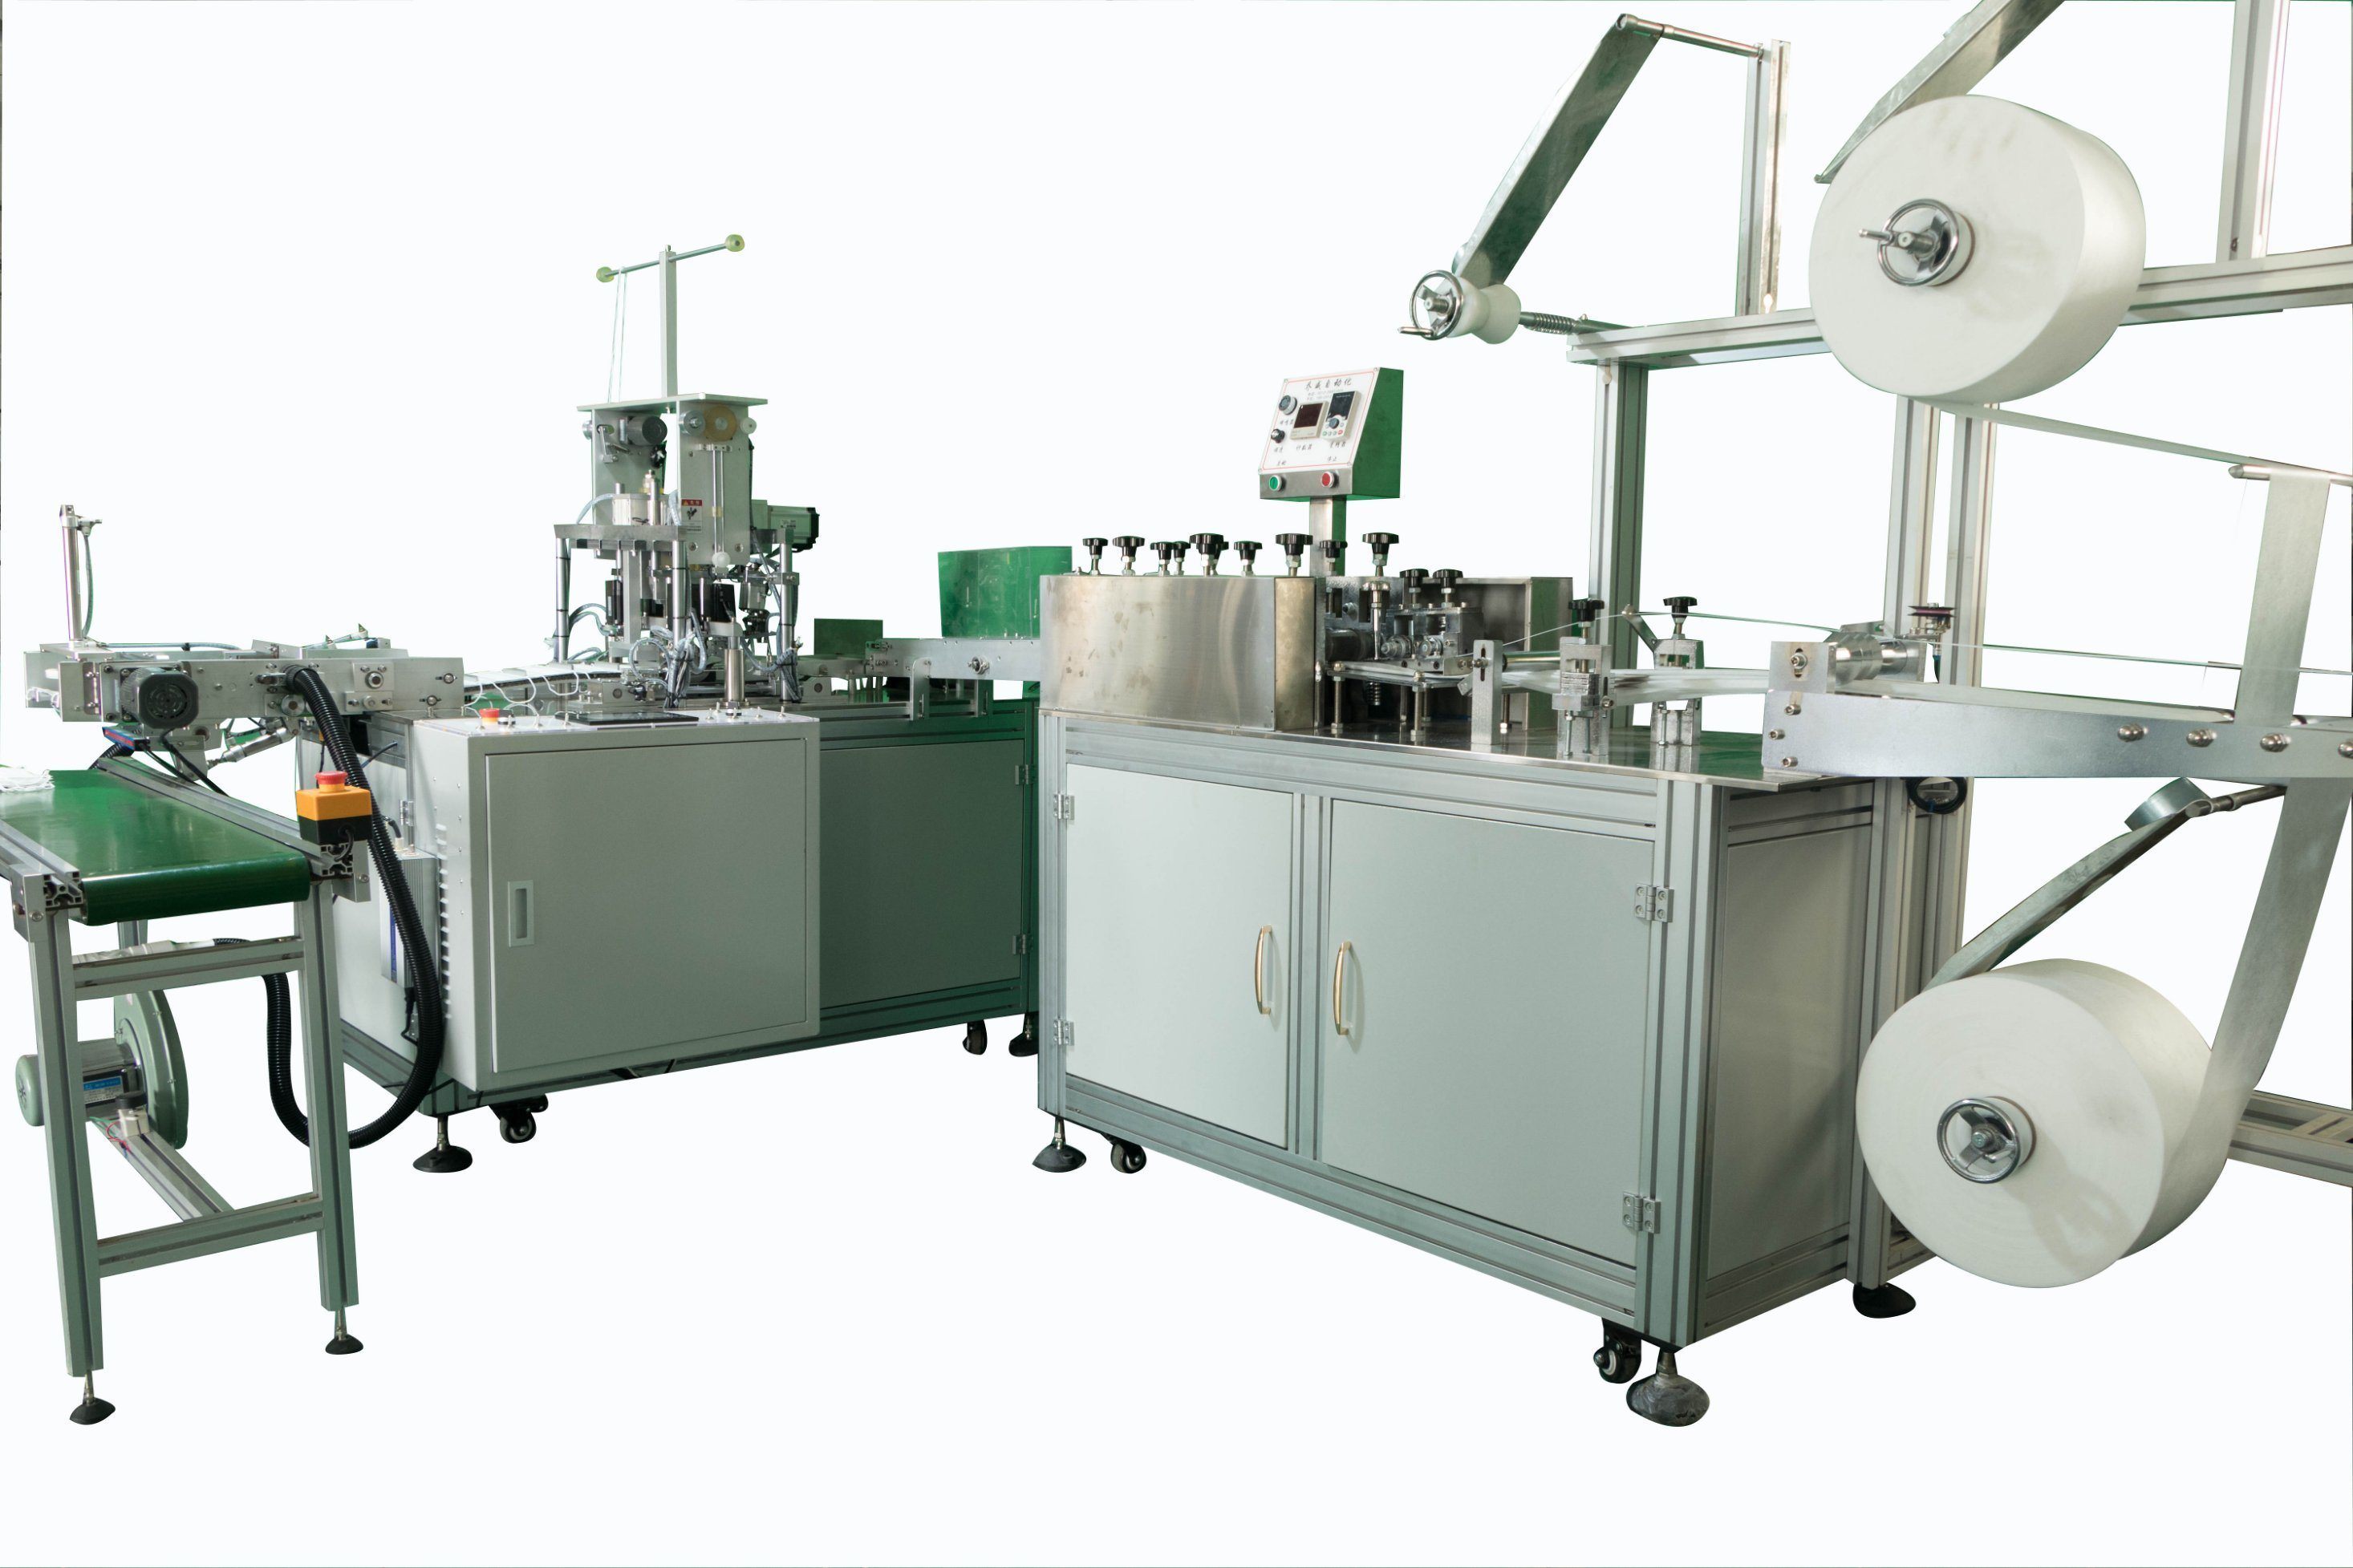 Automatic Machine Textile Recycling Inner Ear-Loop Welding Machine (Air Cylinder Type)